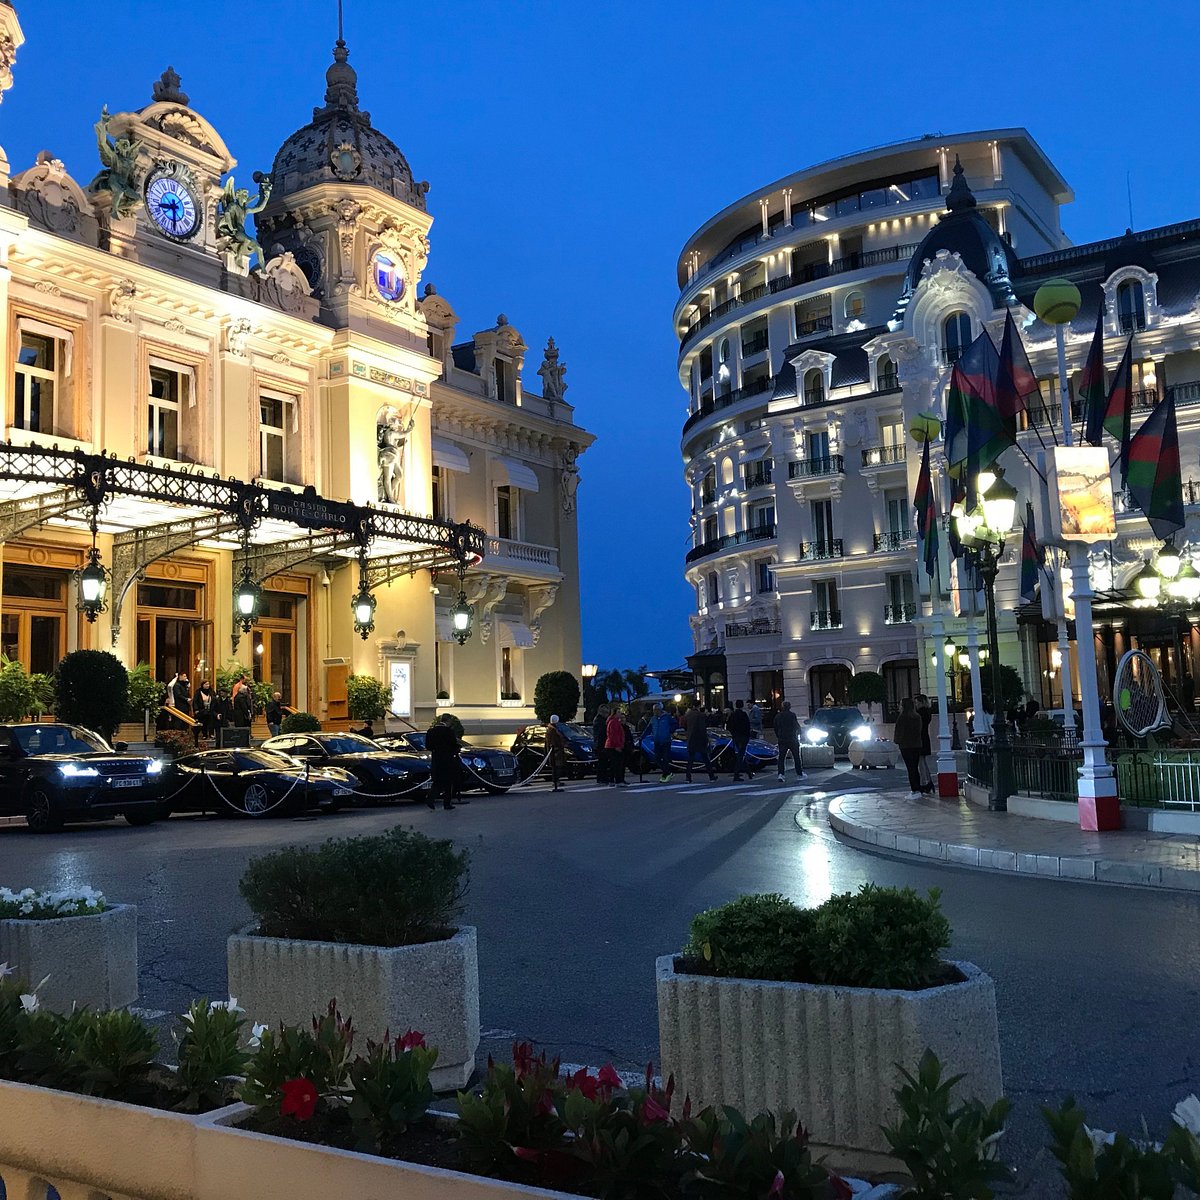 Hôtel de Paris Monte-Carlo - The Queen of Art, a major chess pop up on the  Place du Casino. Are you ready to play?